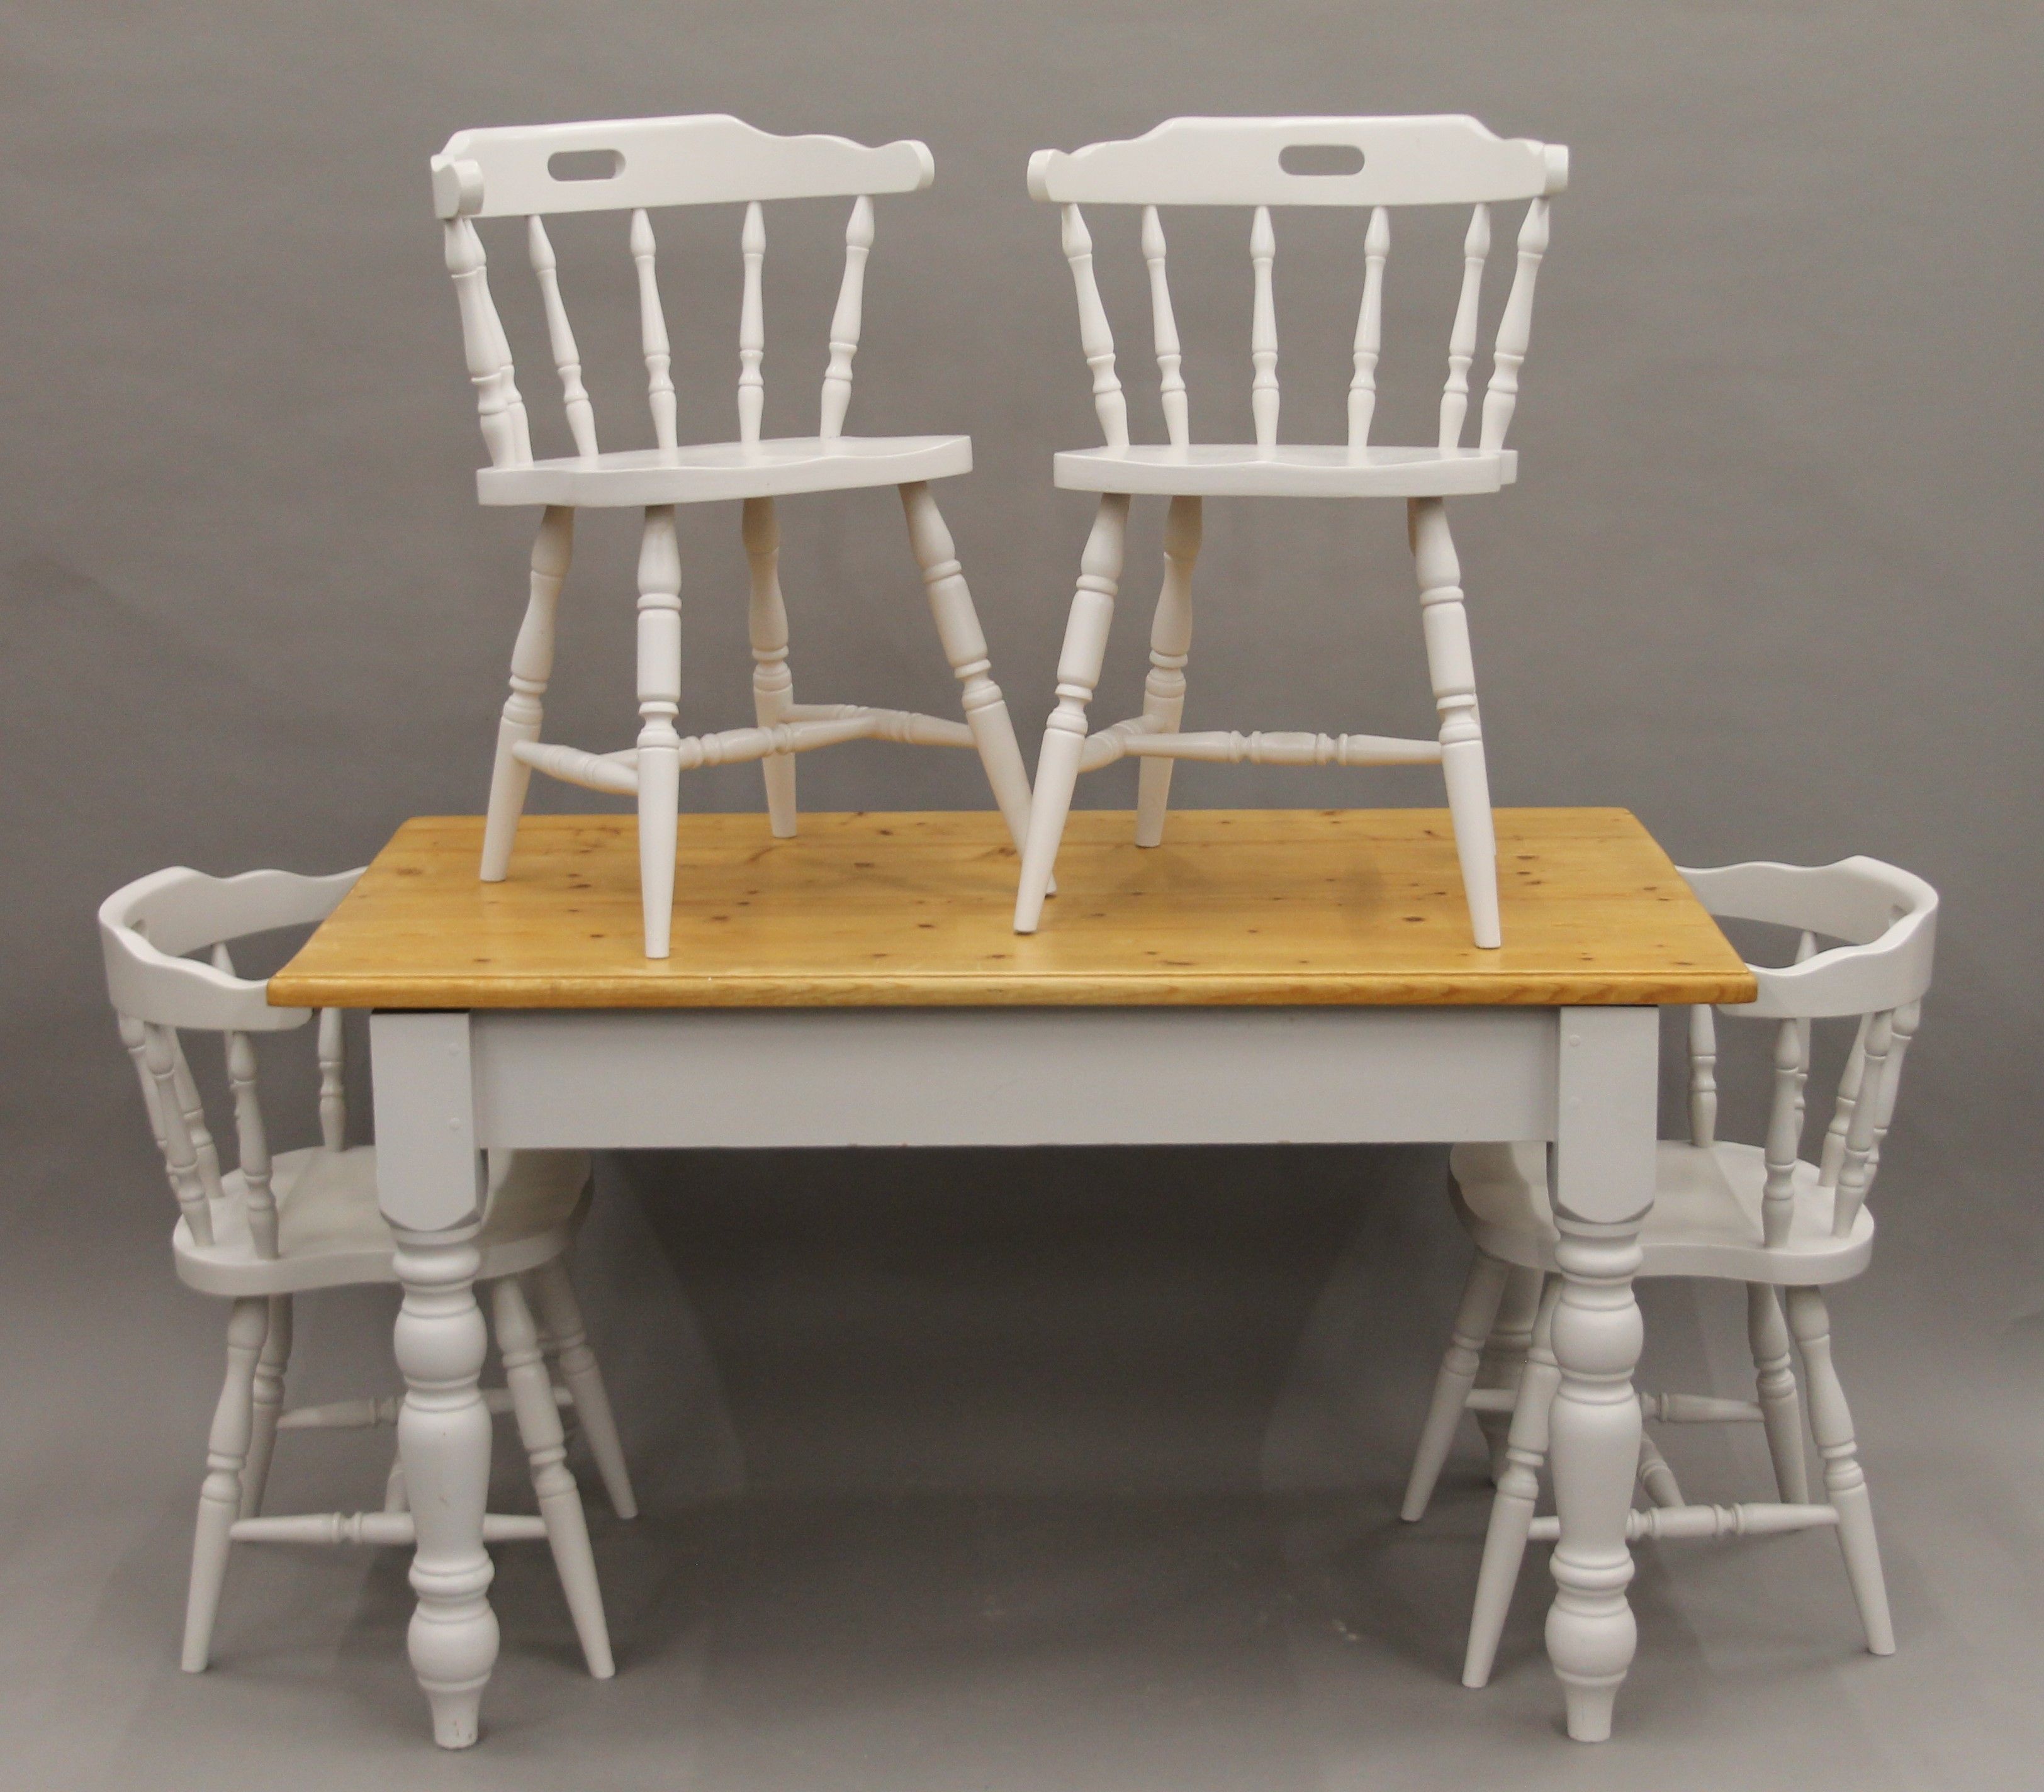 A modern white painted pine table and a set of four modern white painted chairs.